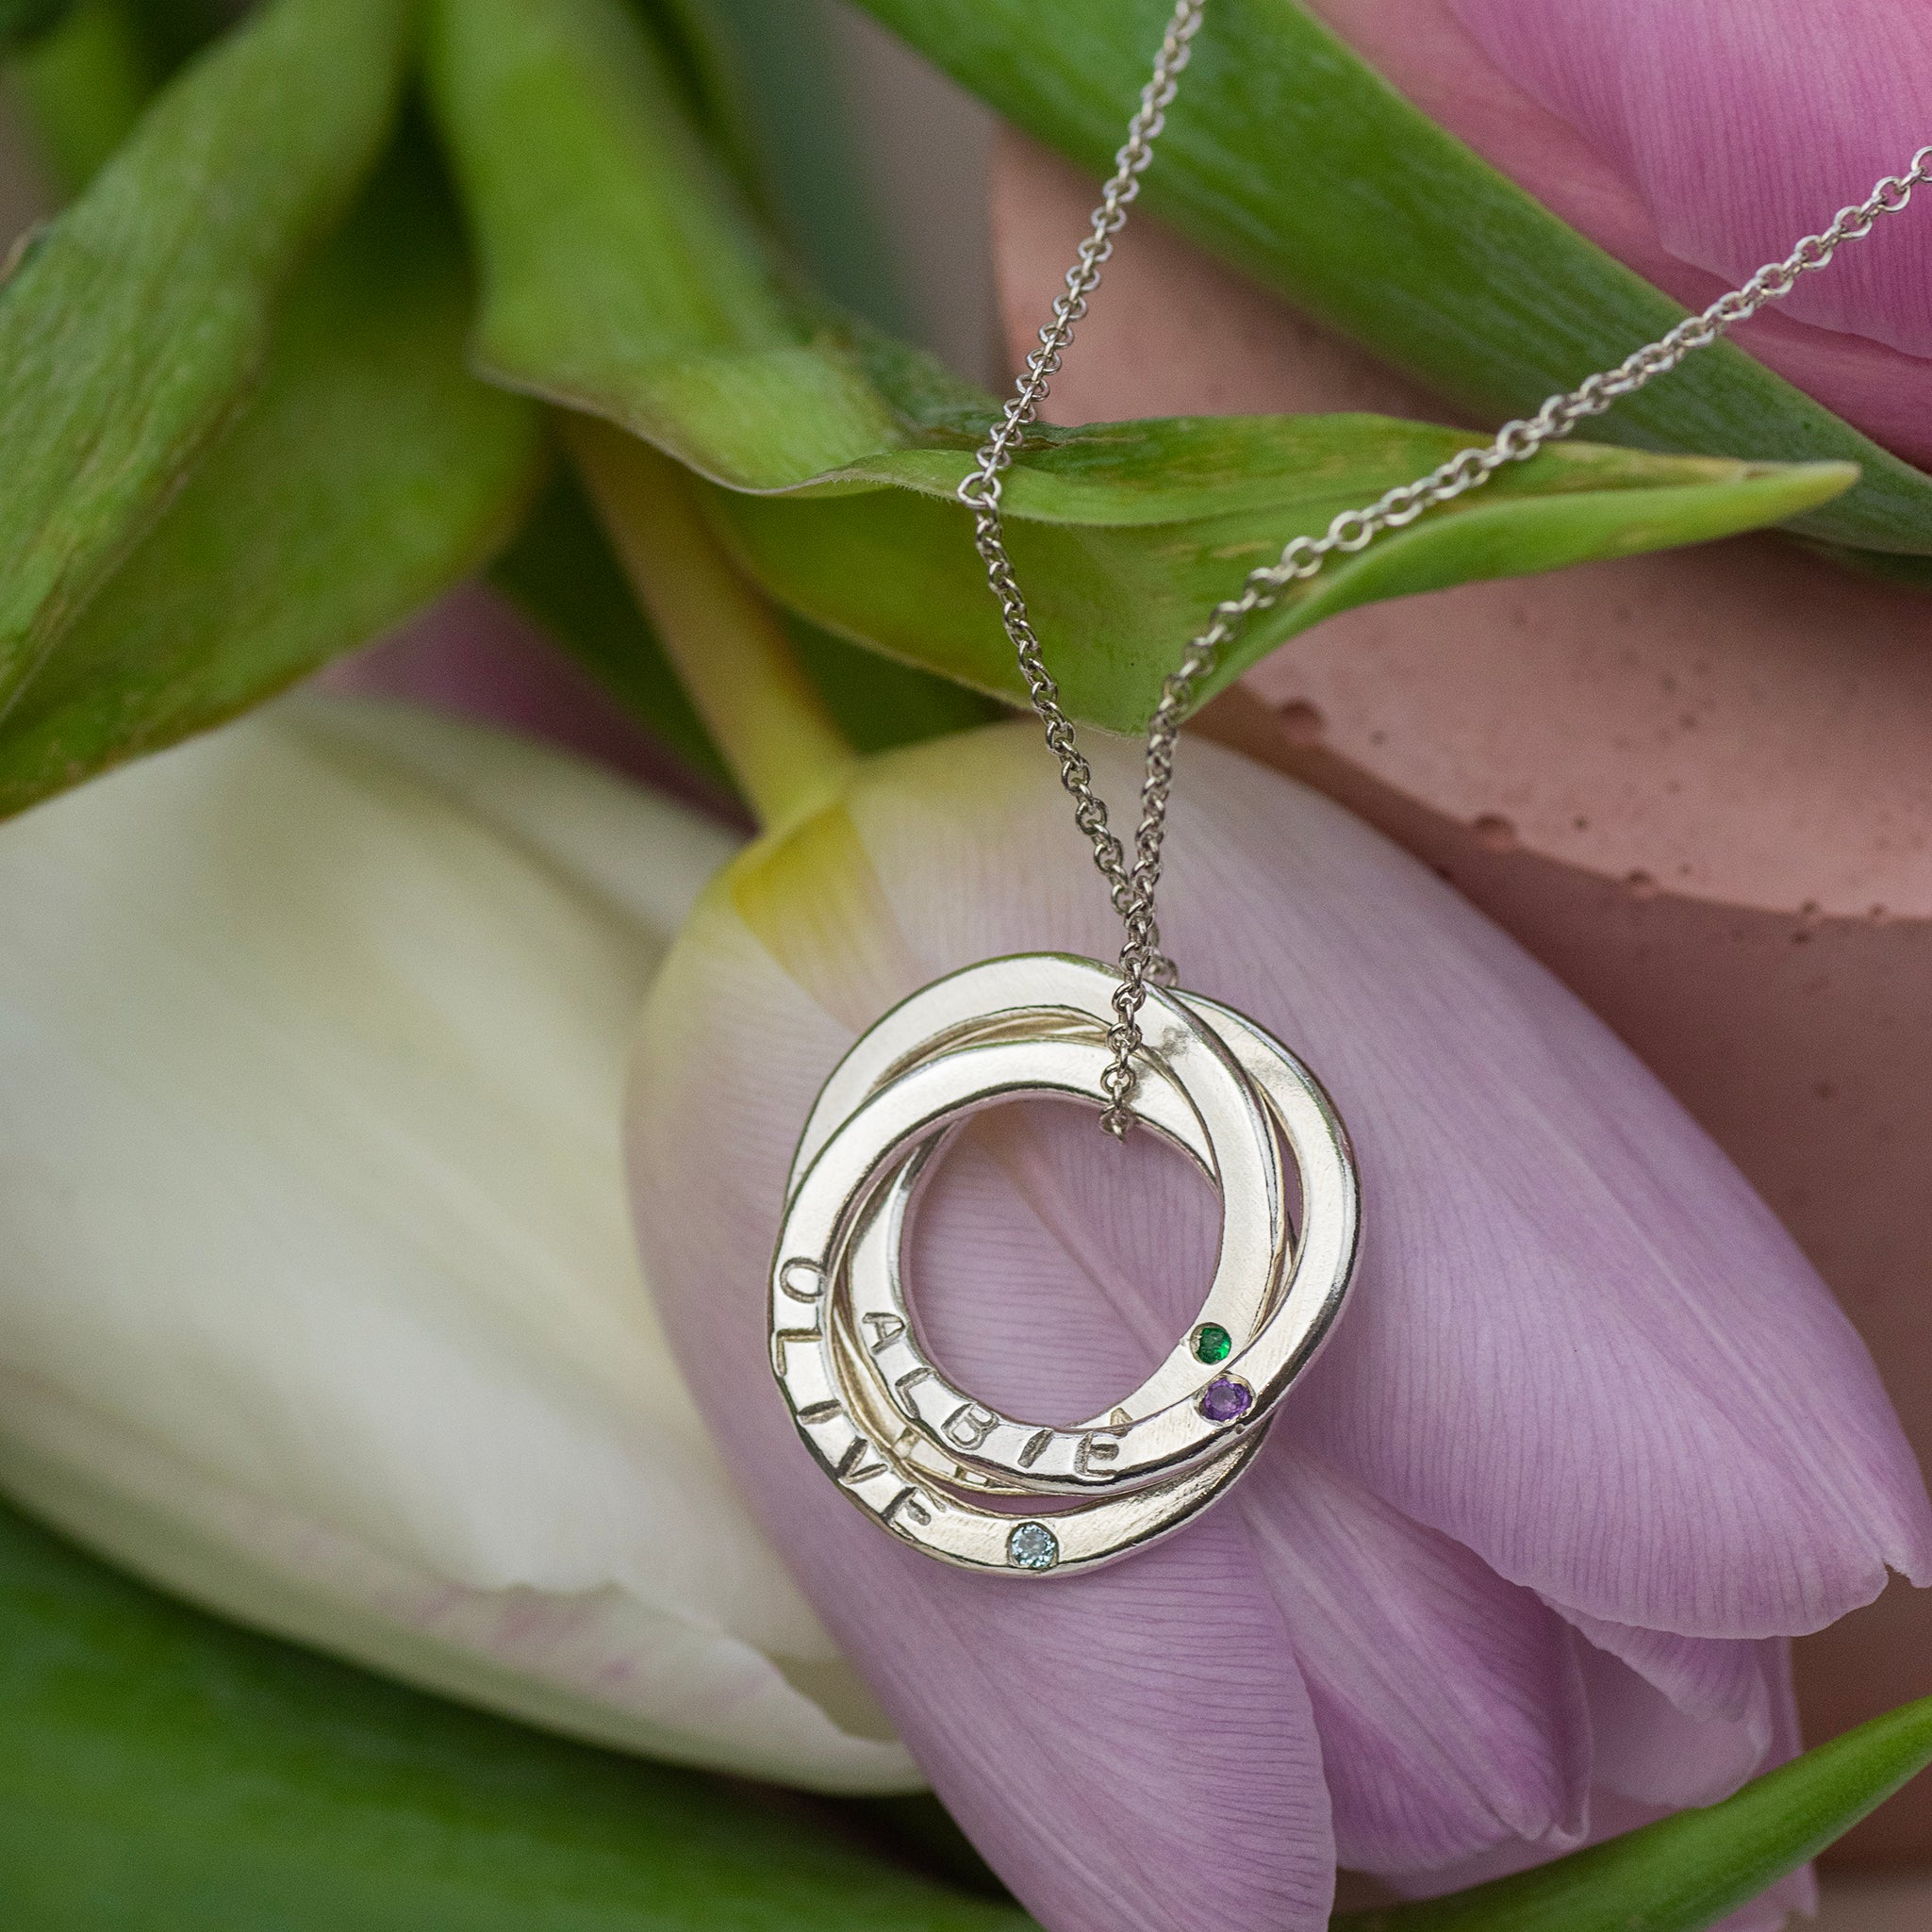 Personalised Scalloped Circle Necklace | Posh Totty Designs